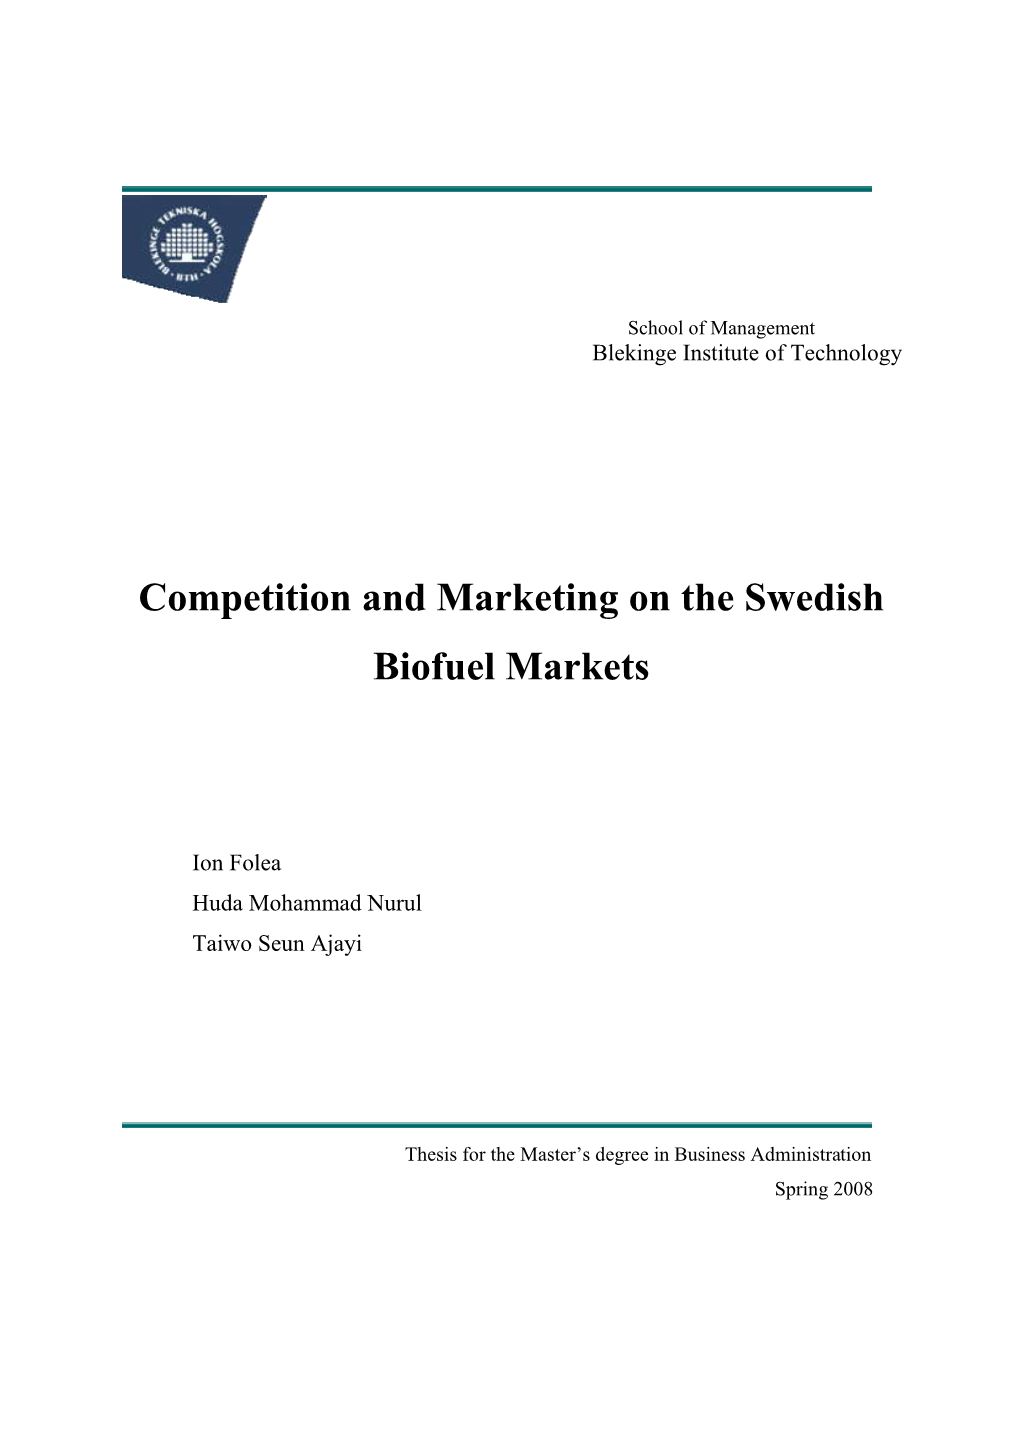 Competition and Marketing on the Swedish Biofuel Markets